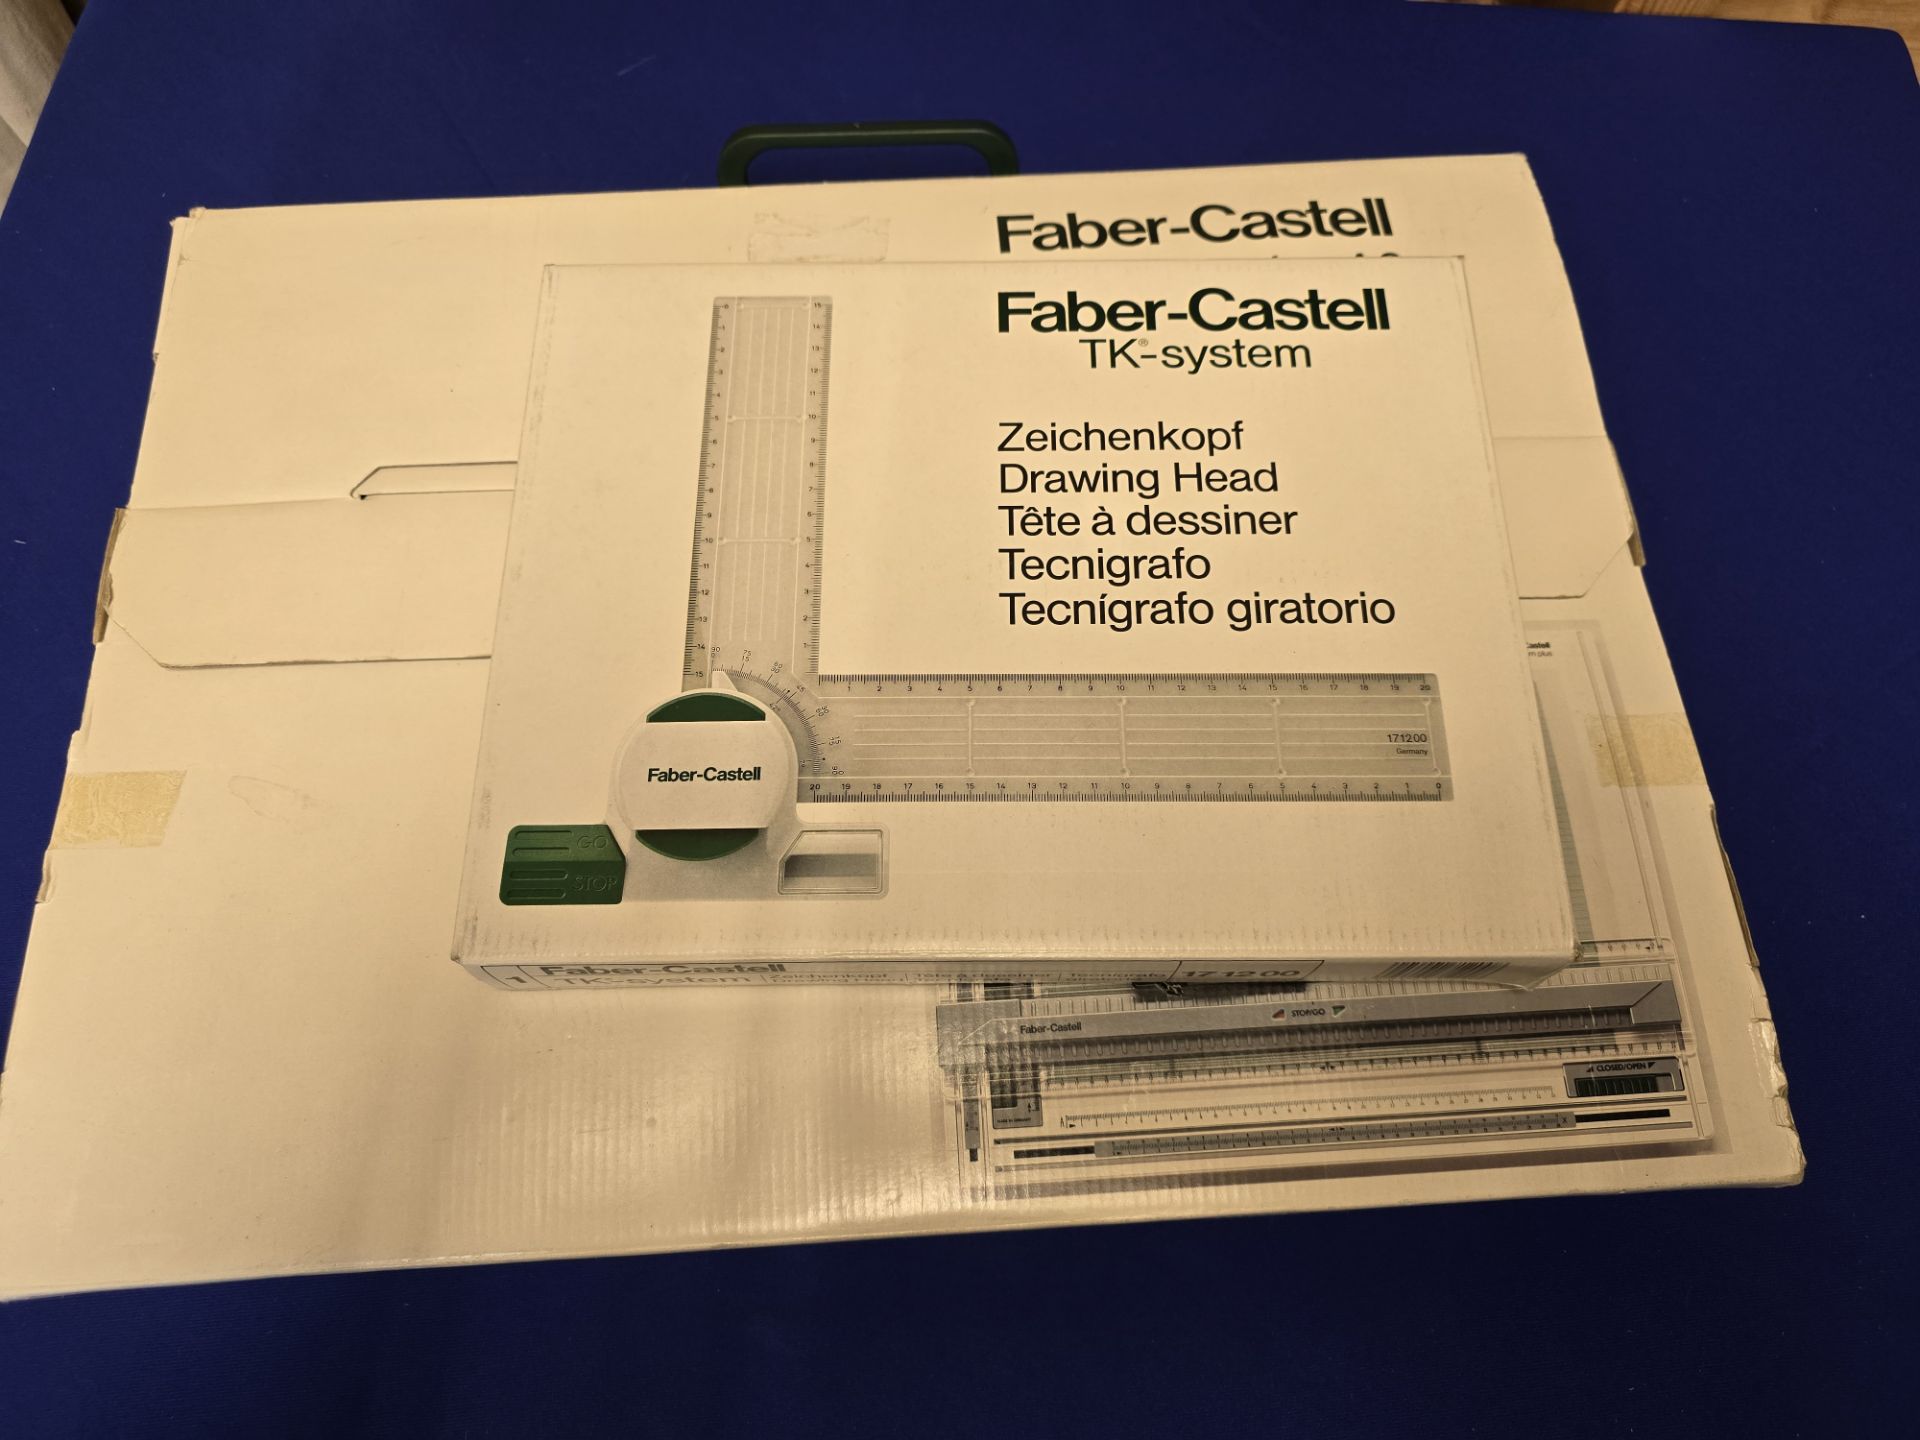 Faber-Castell TK-system plus A3 Technical drawing board + Extras - Image 11 of 16